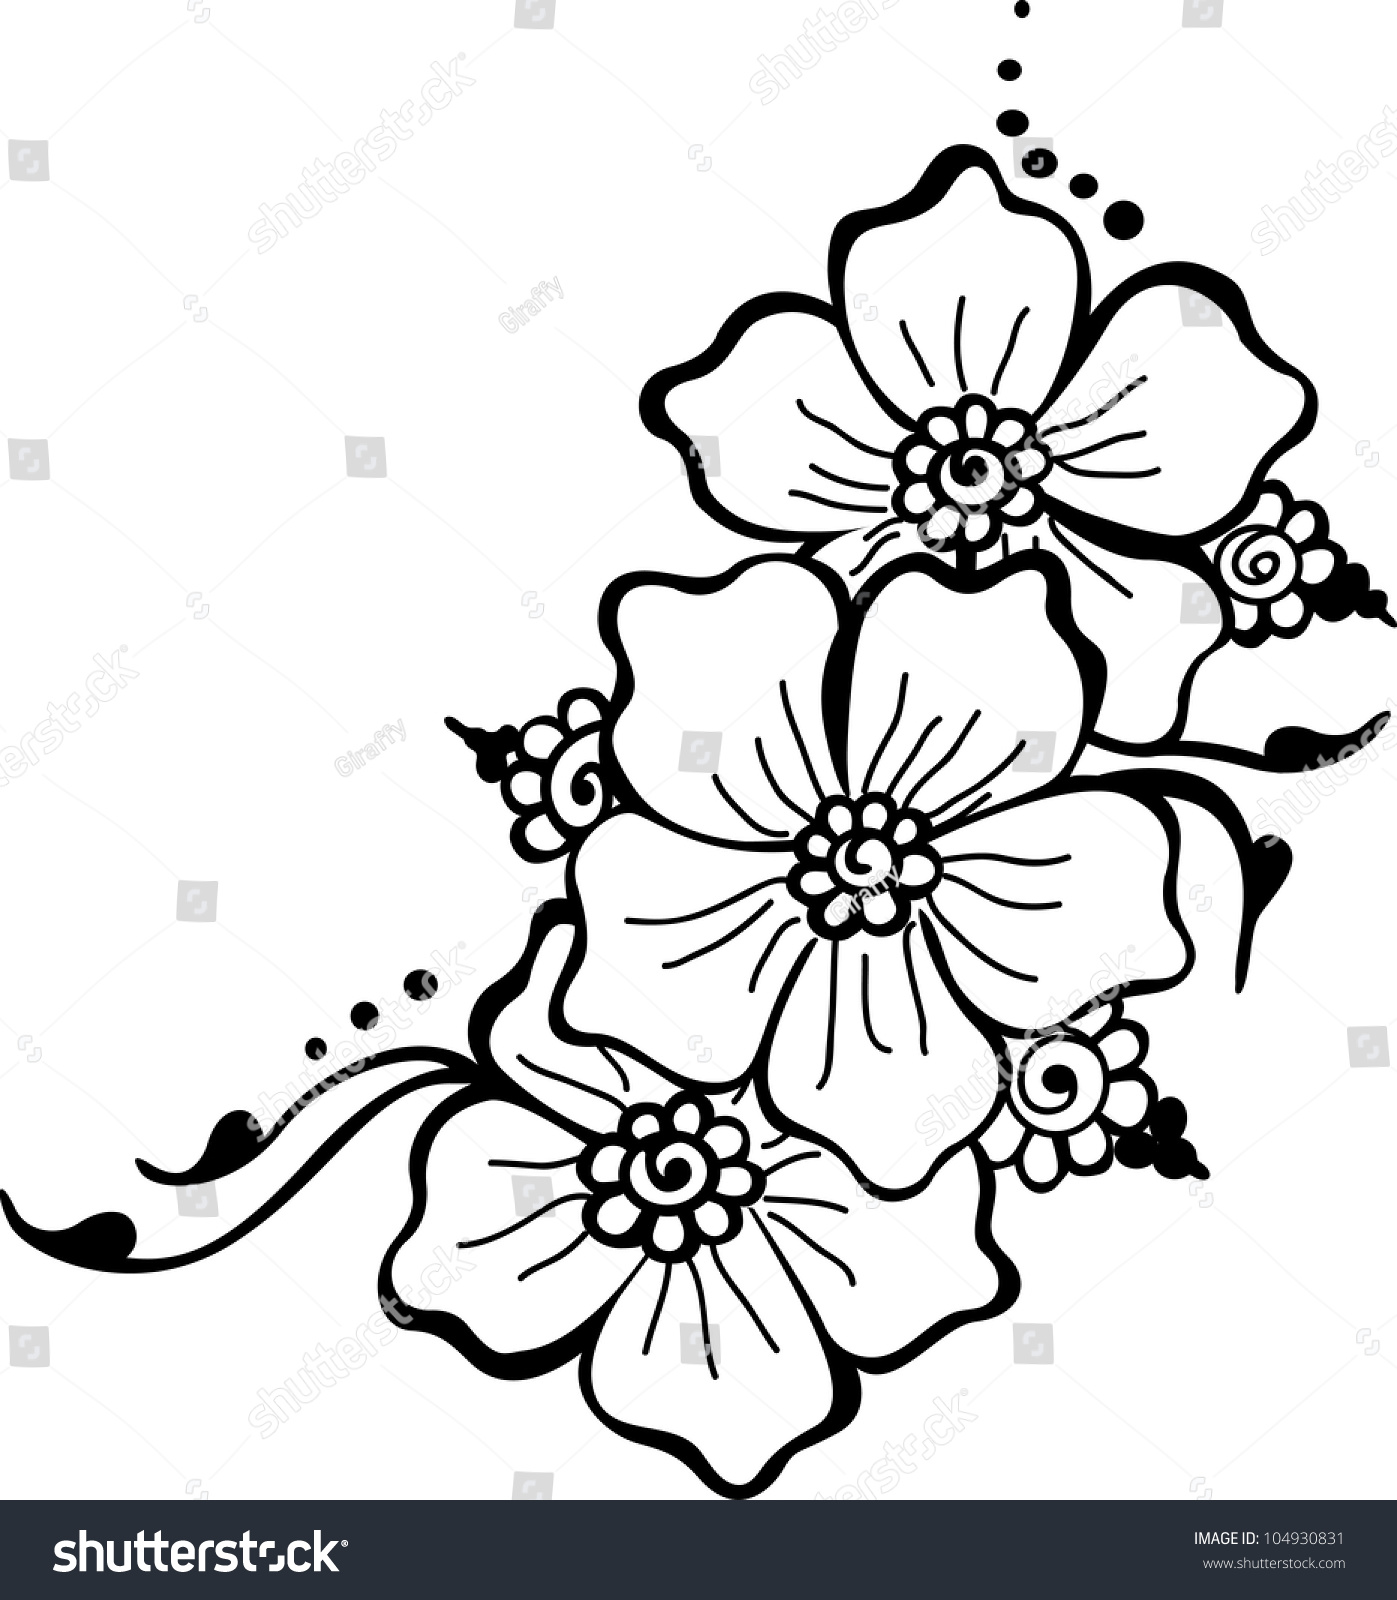 vector clipart flowers free - photo #50